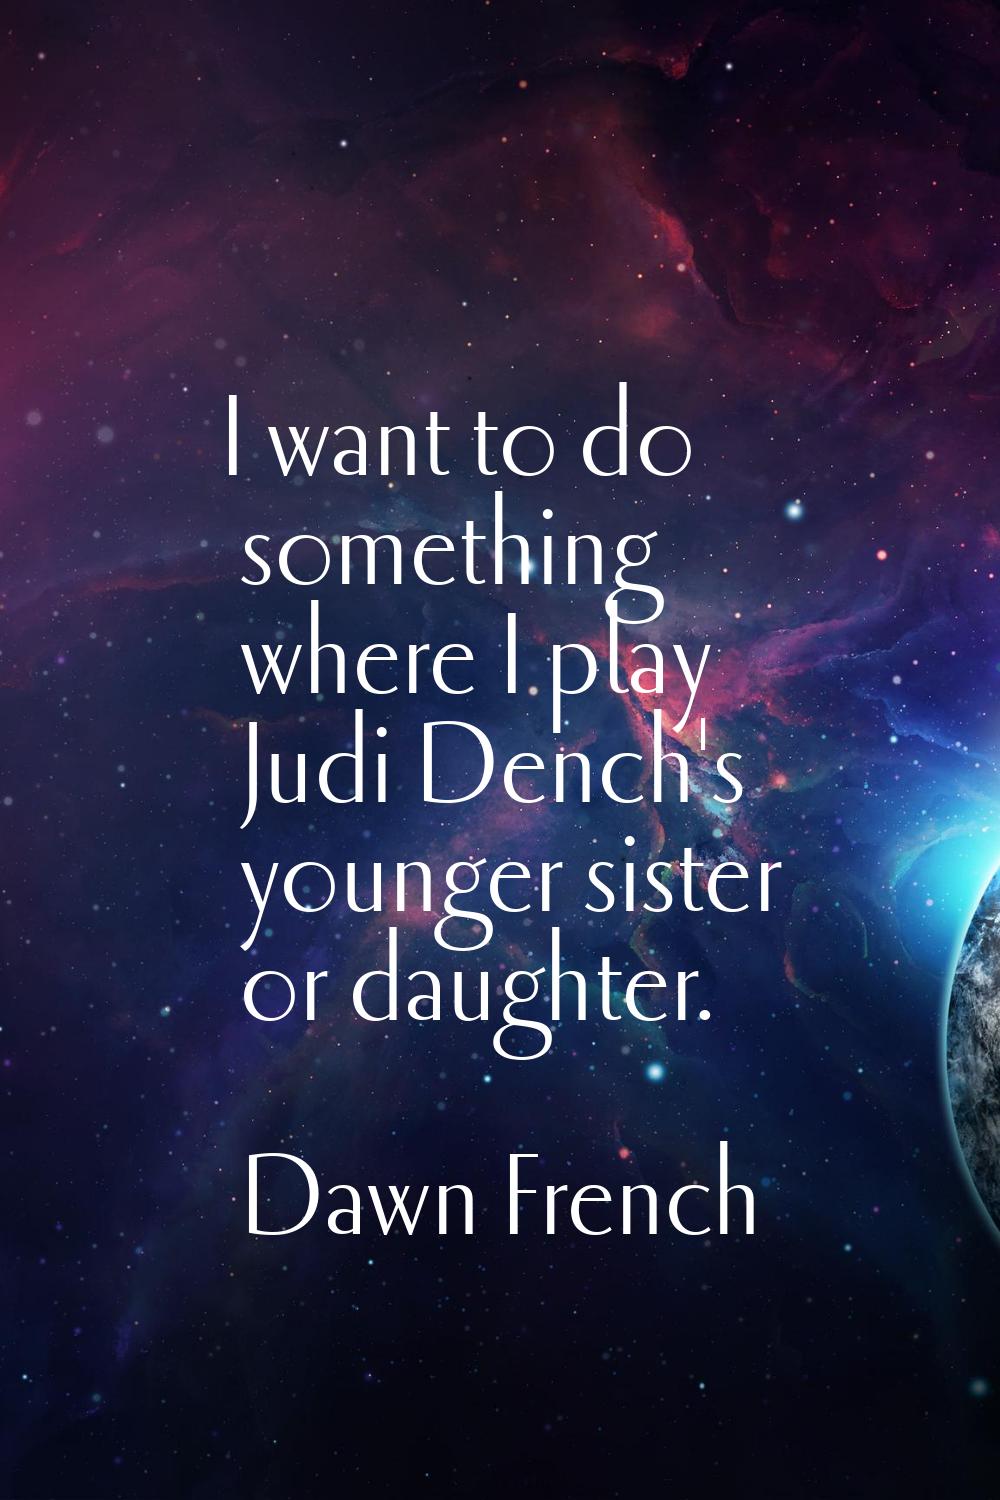 I want to do something where I play Judi Dench's younger sister or daughter.